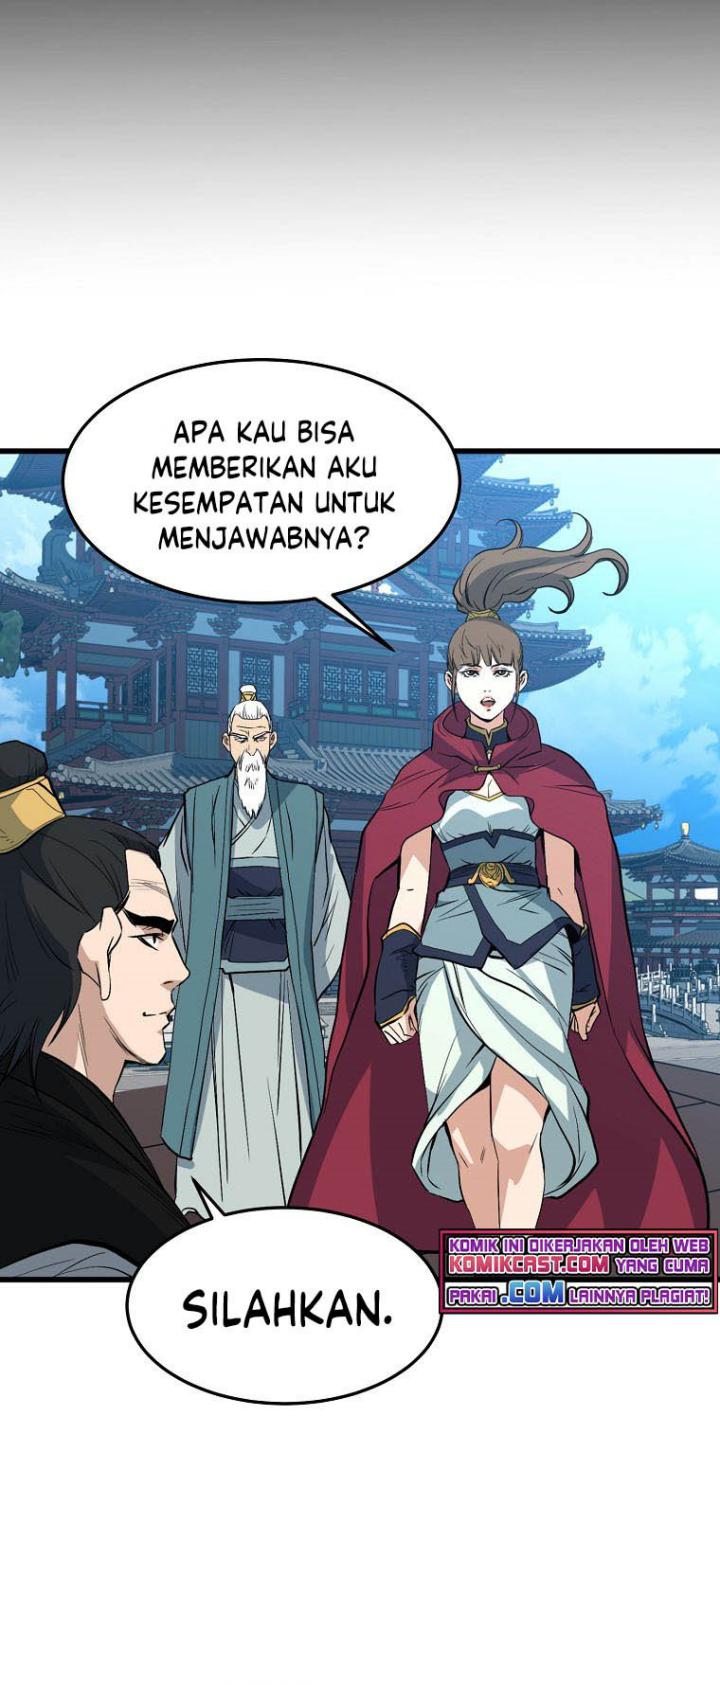 Grand General Chapter 19